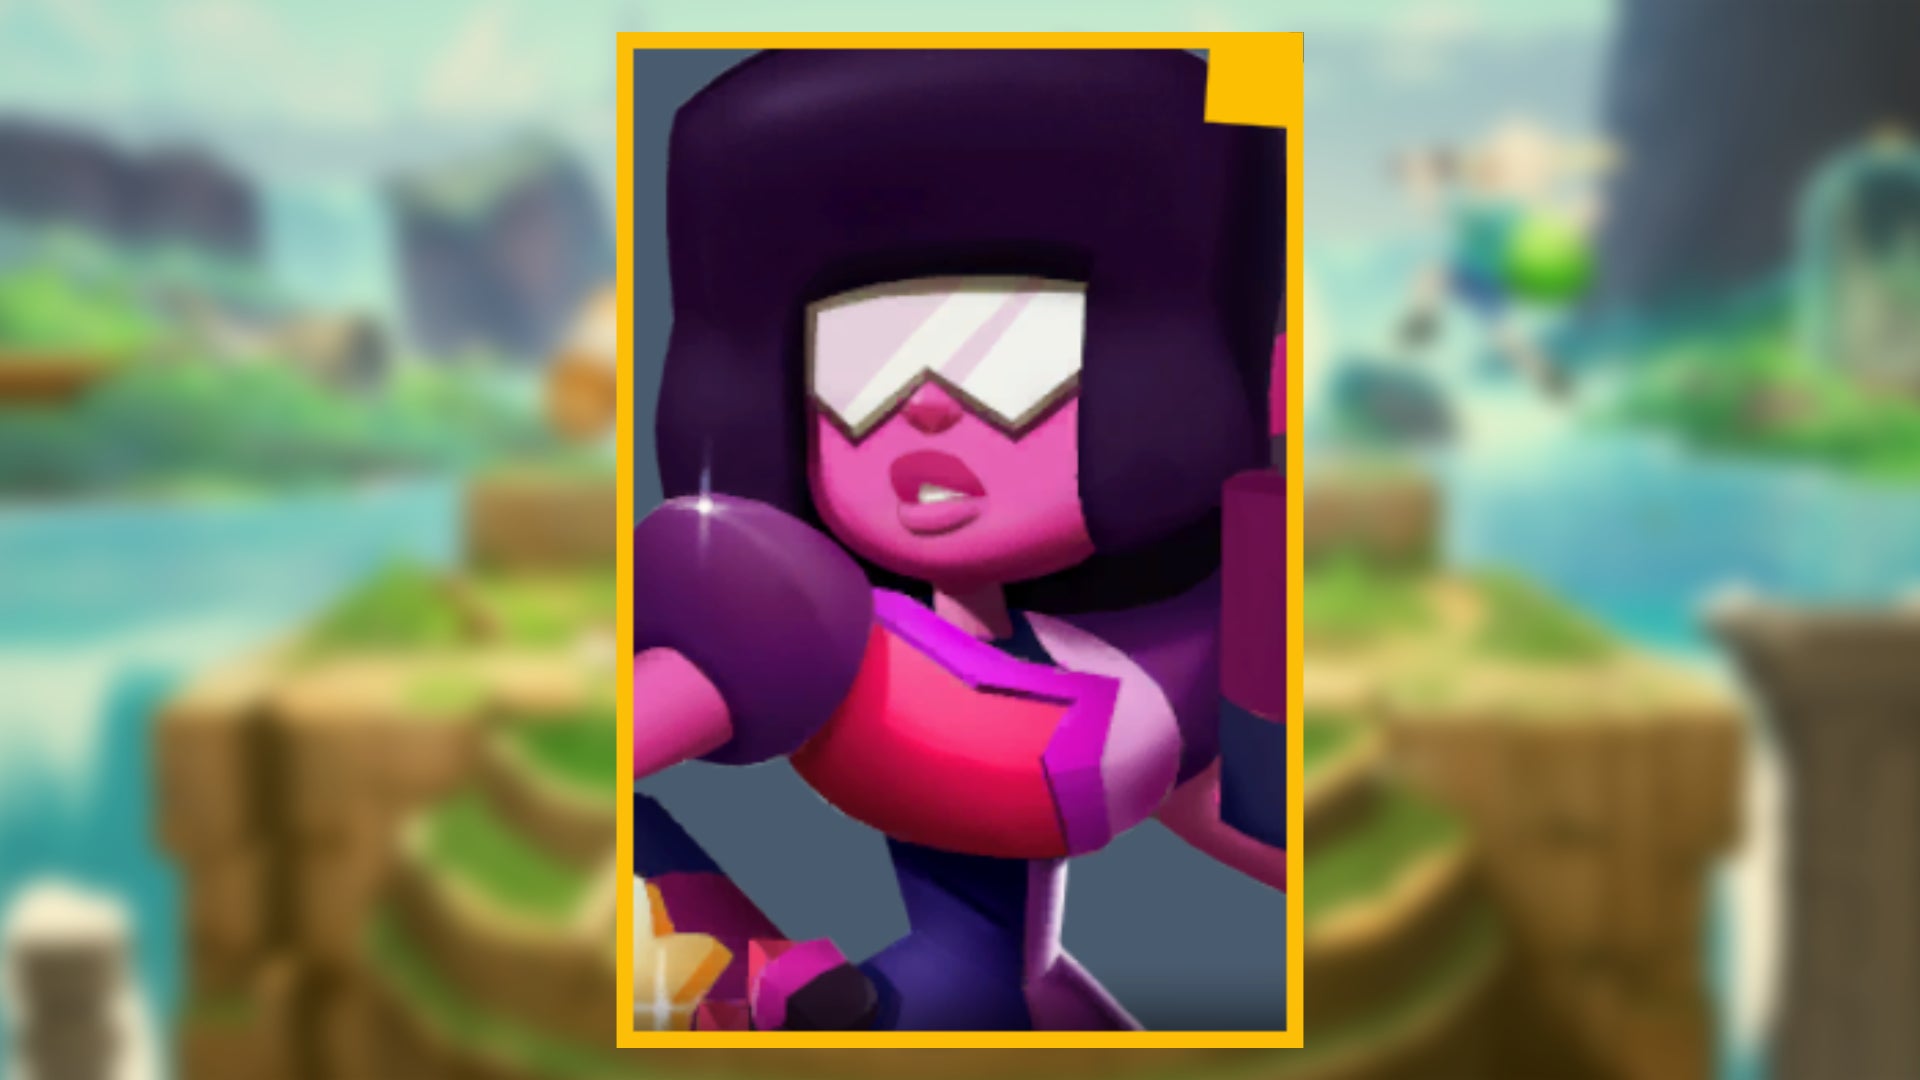 The character portrait of Garnet, a playable character in MultiVersus, against a blurred background.